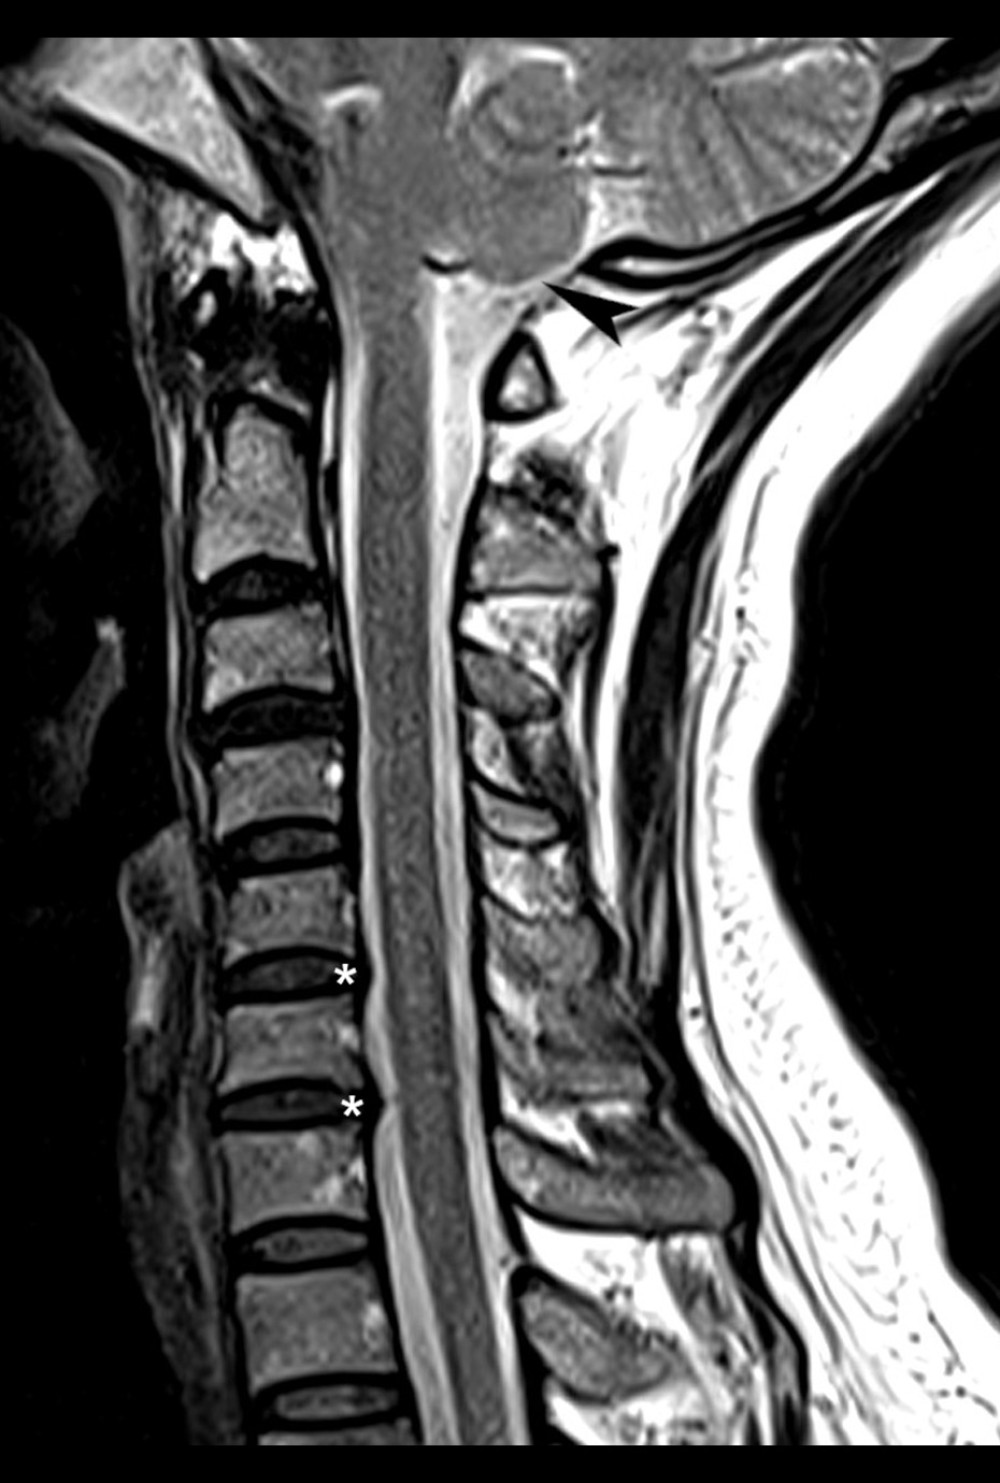 Cervical magnetic resonance imaging, T2-weighted sagittal view. There is evidence of spondylosis, including disc bulges (*), most evident in this view at C5–6 and C6–7. These were small, centrally located, and not contacting the spinal cord. There is no apparent central canal or neuroforaminal stenosis. Low-lying cerebellar tonsils are evident, measuring 0.39 cm inferior to the level of the foramen magnum (arrowhead).